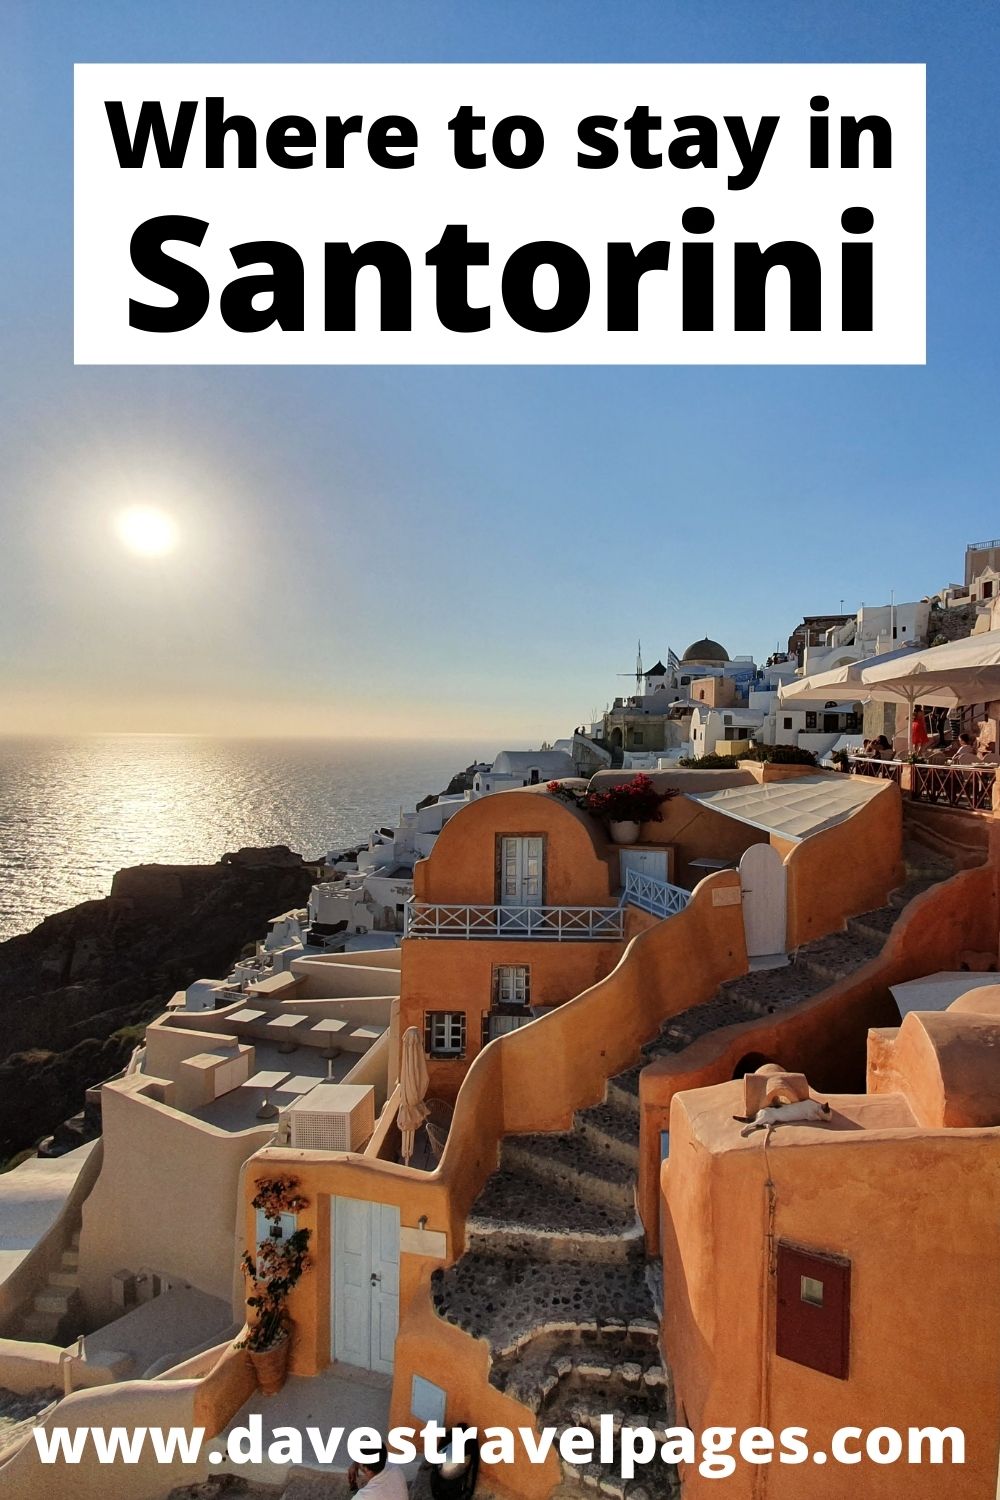 Where to stay on Santorini - A complete guide